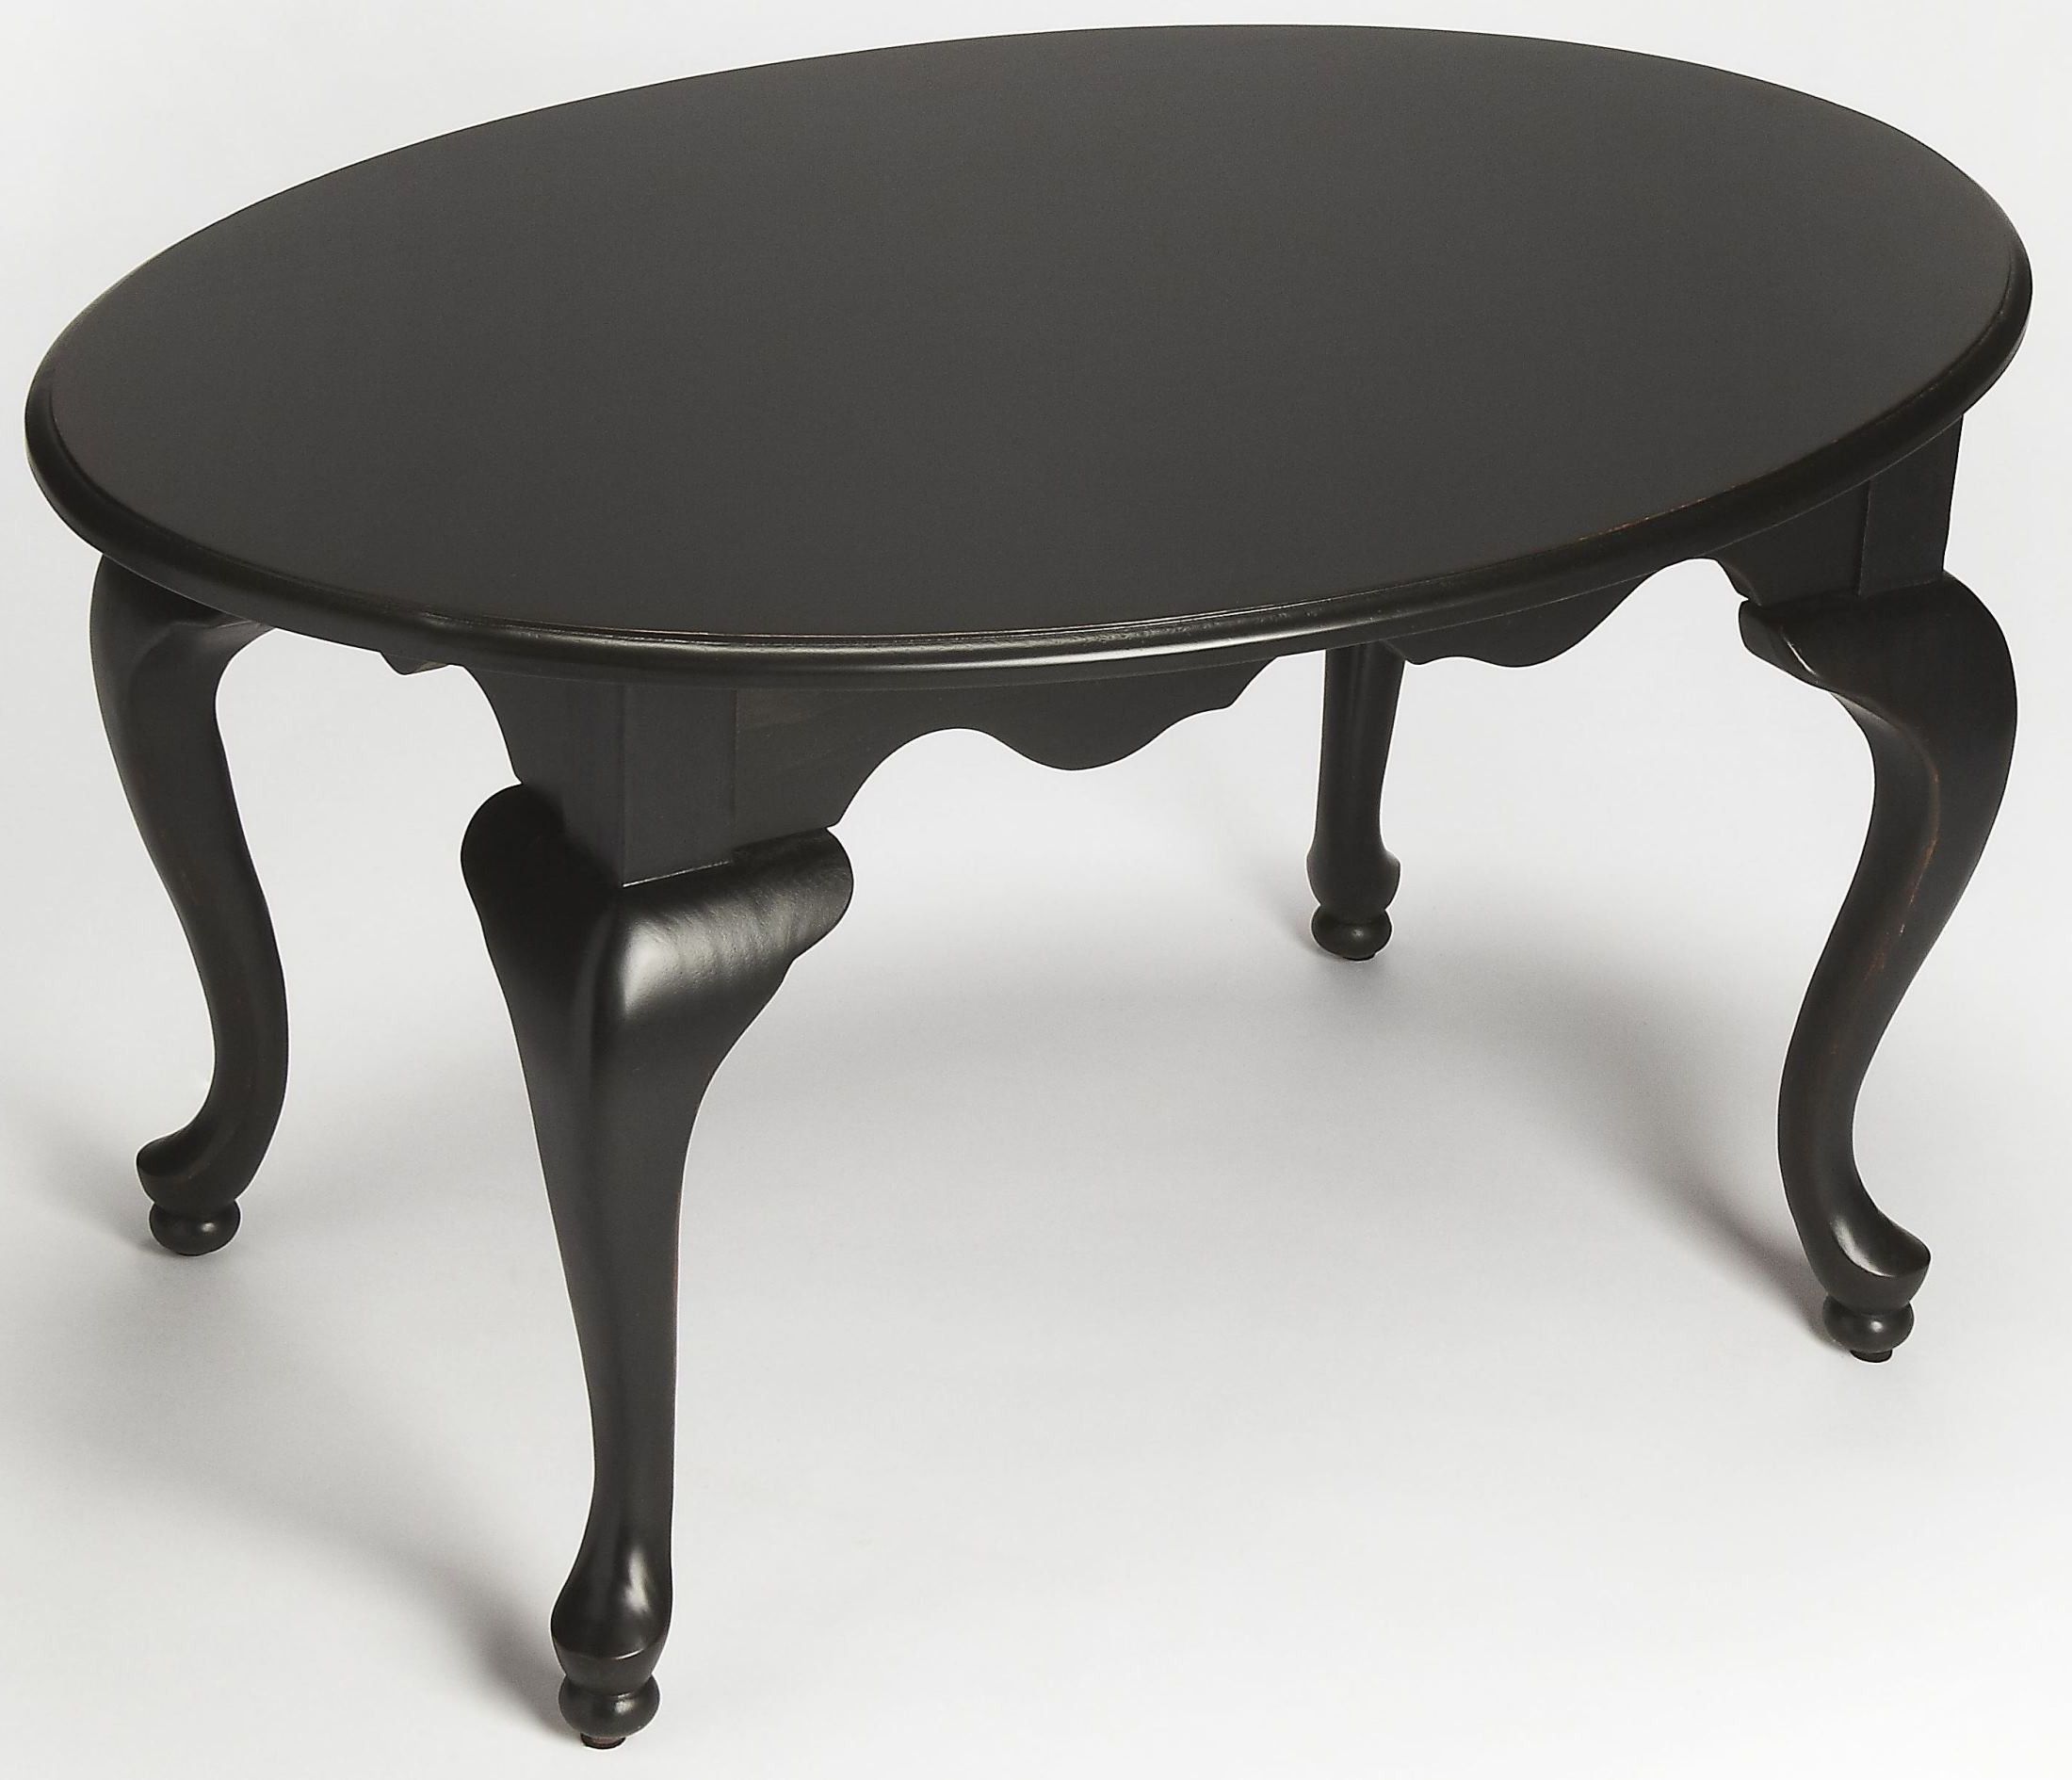 Widely Used Grace Black Licorice Oval Cocktail Table, 3012111, Butler With Dark Coffee Bean Cocktail Tables (View 7 of 10)